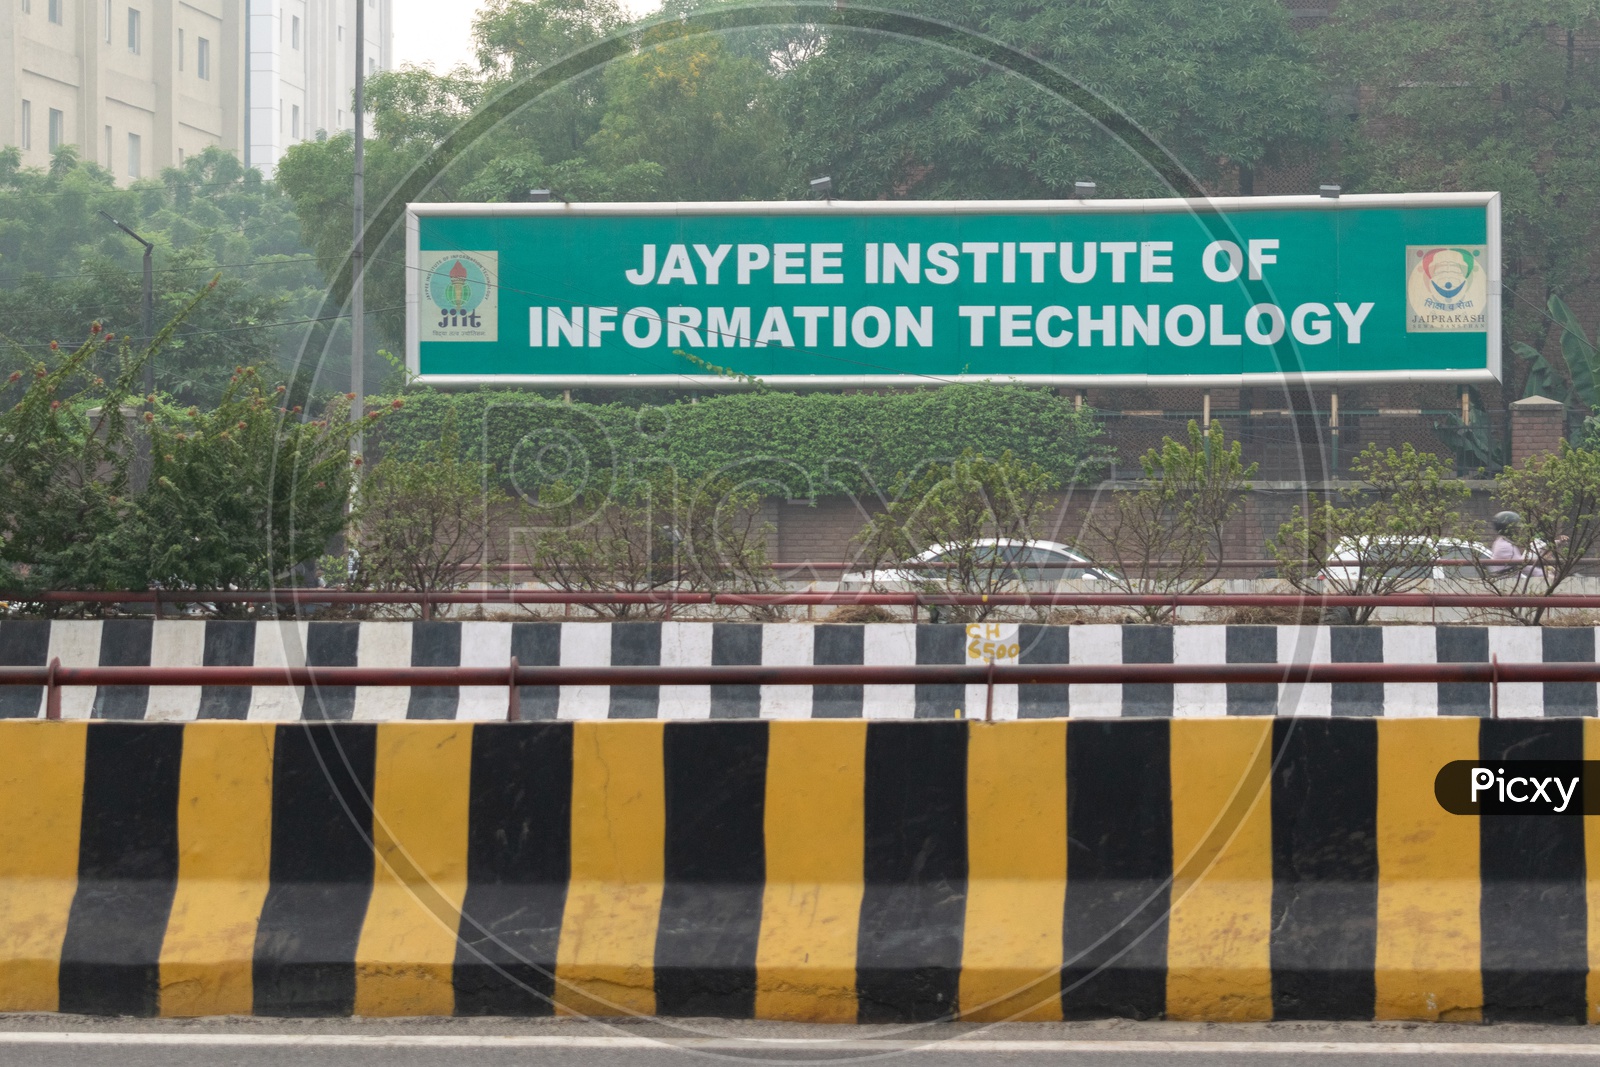 Jaypee Institute Of Information Technology  Name Board